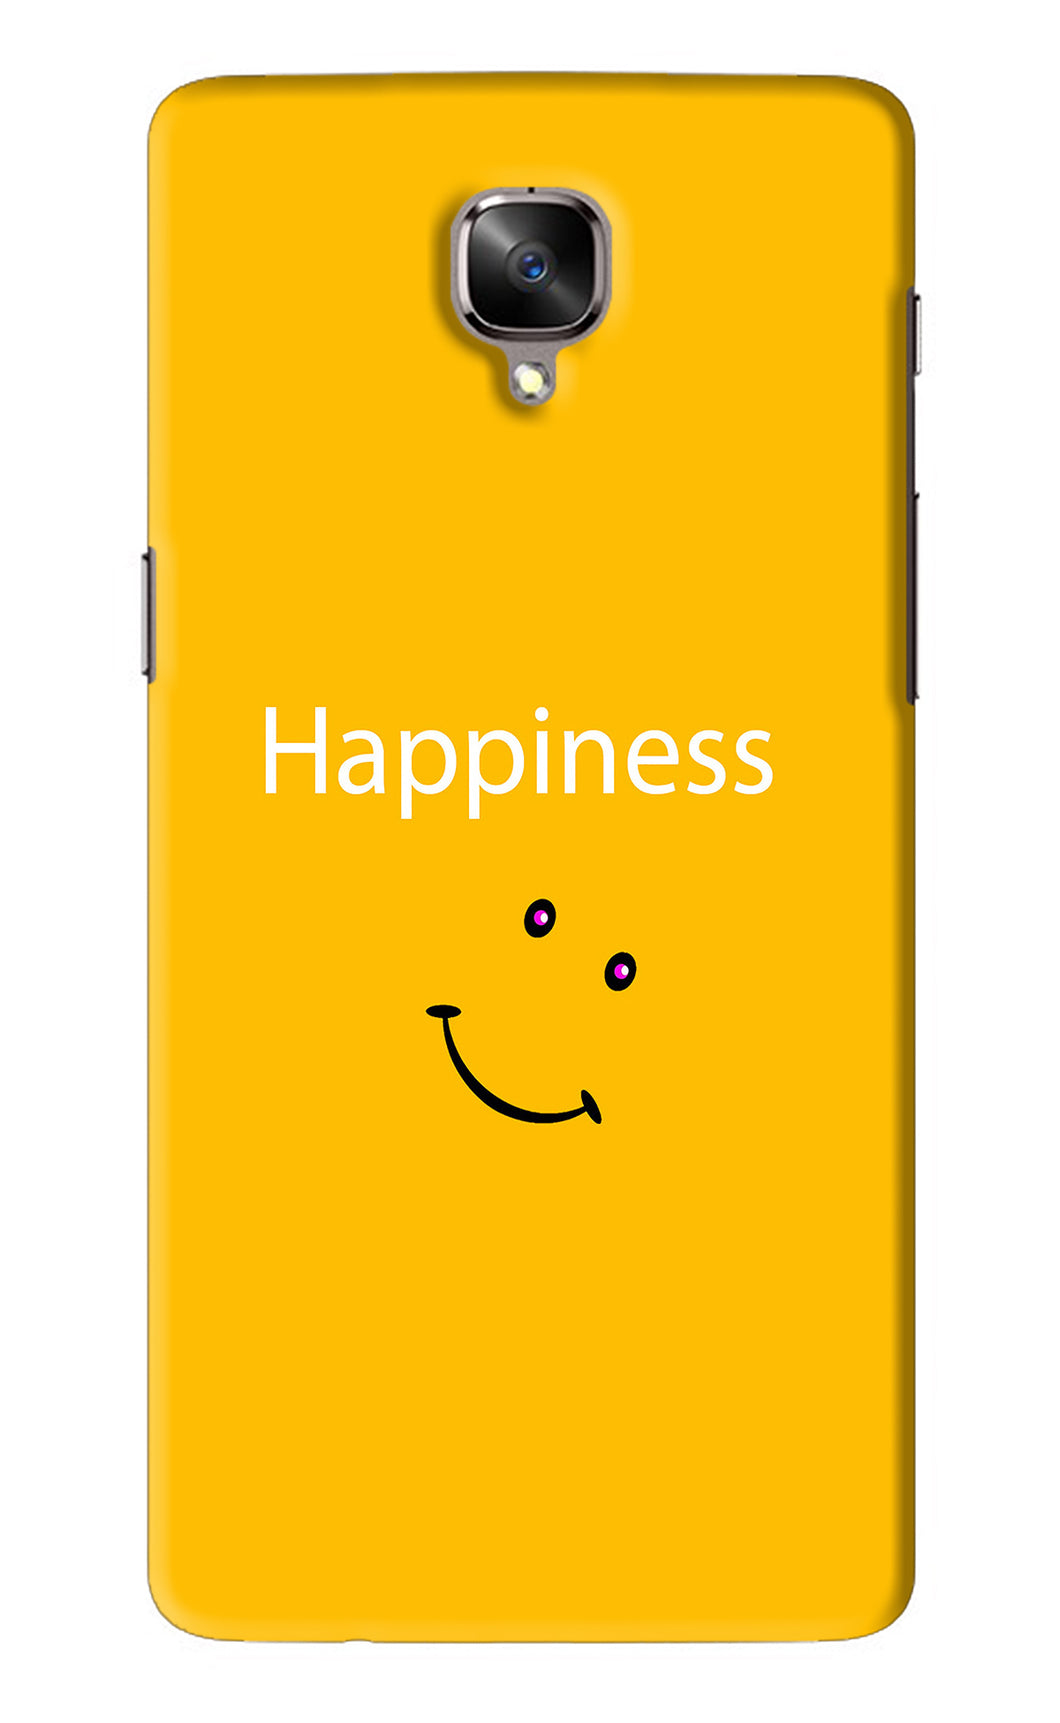 Happiness With Smiley OnePlus 3T Back Skin Wrap